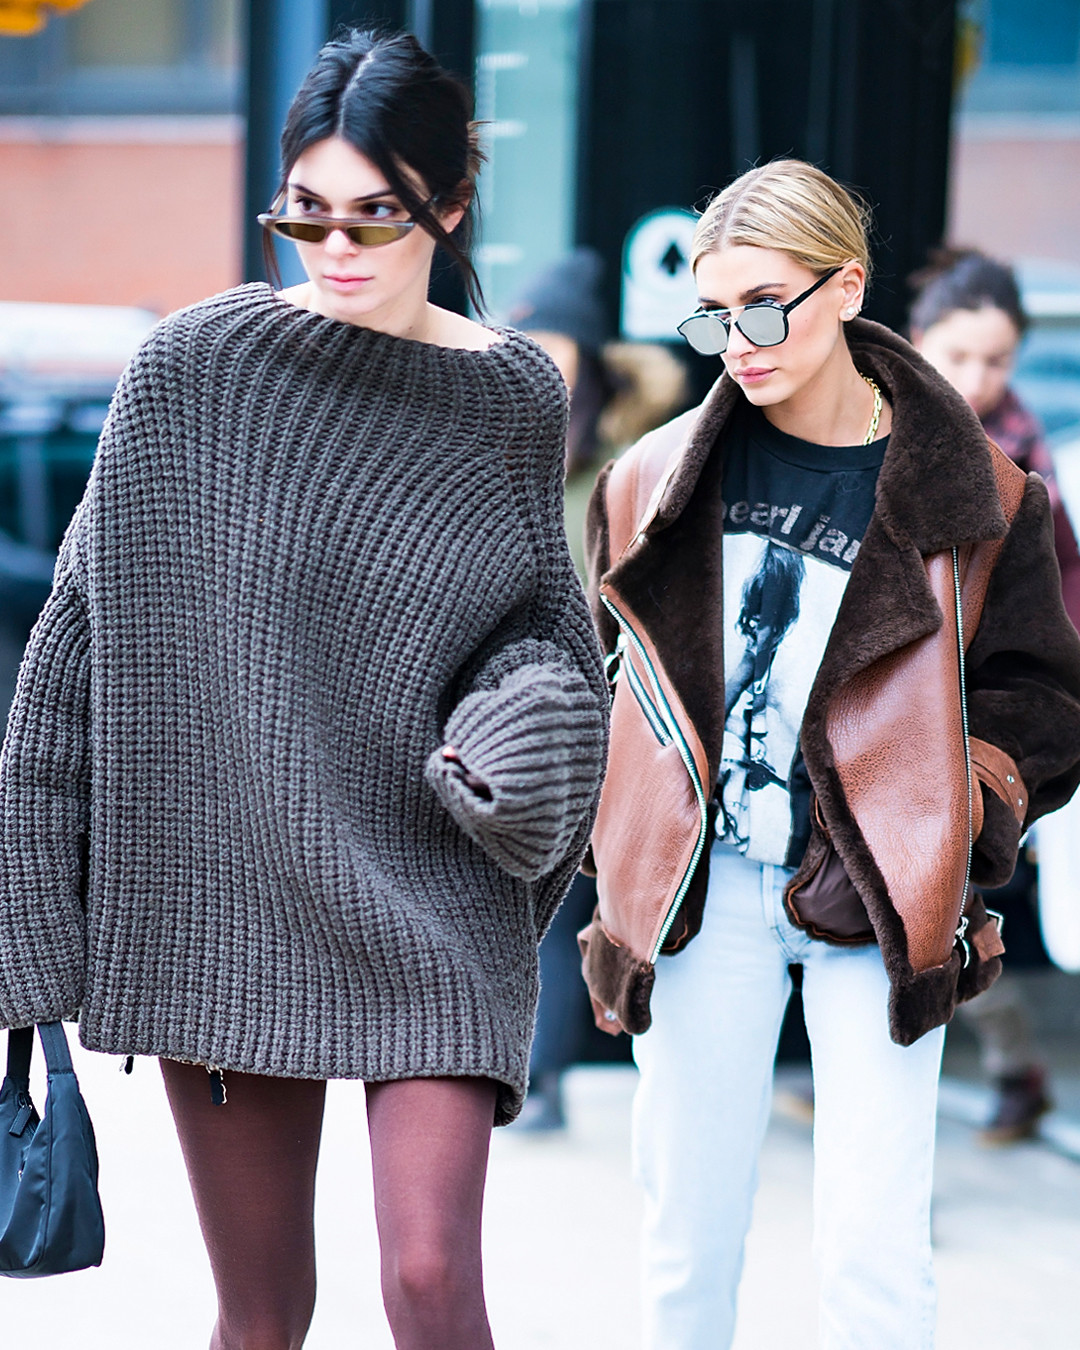 Kendall Jenner's Bag Collection: Here Are Her Most Beloved Styles